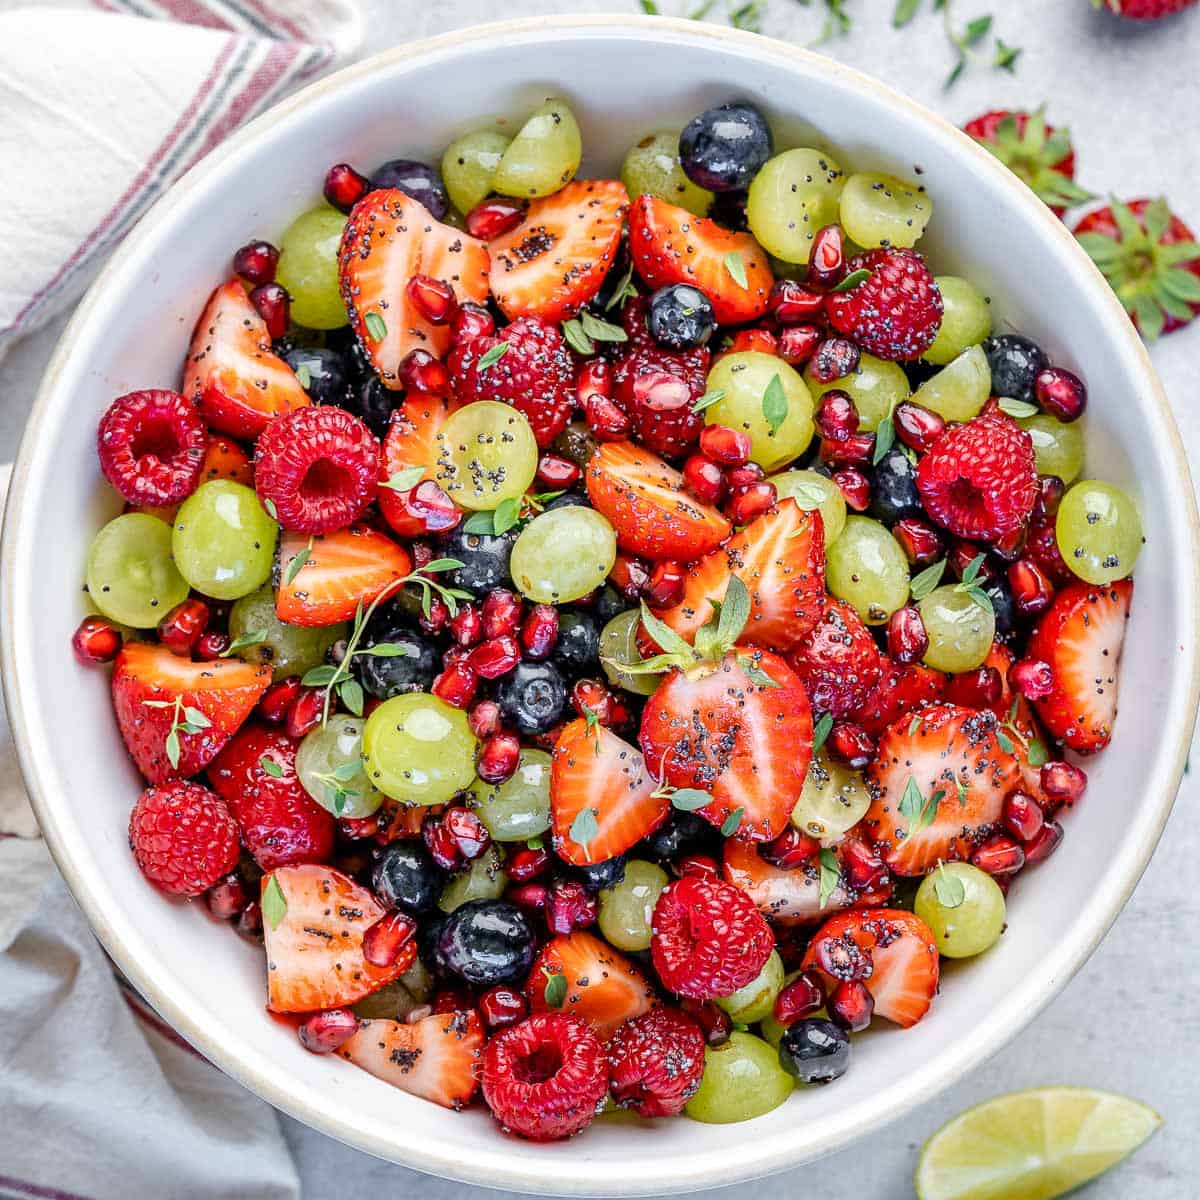 Easy Fruit Salad Recipe - Healthy Fitness Meals